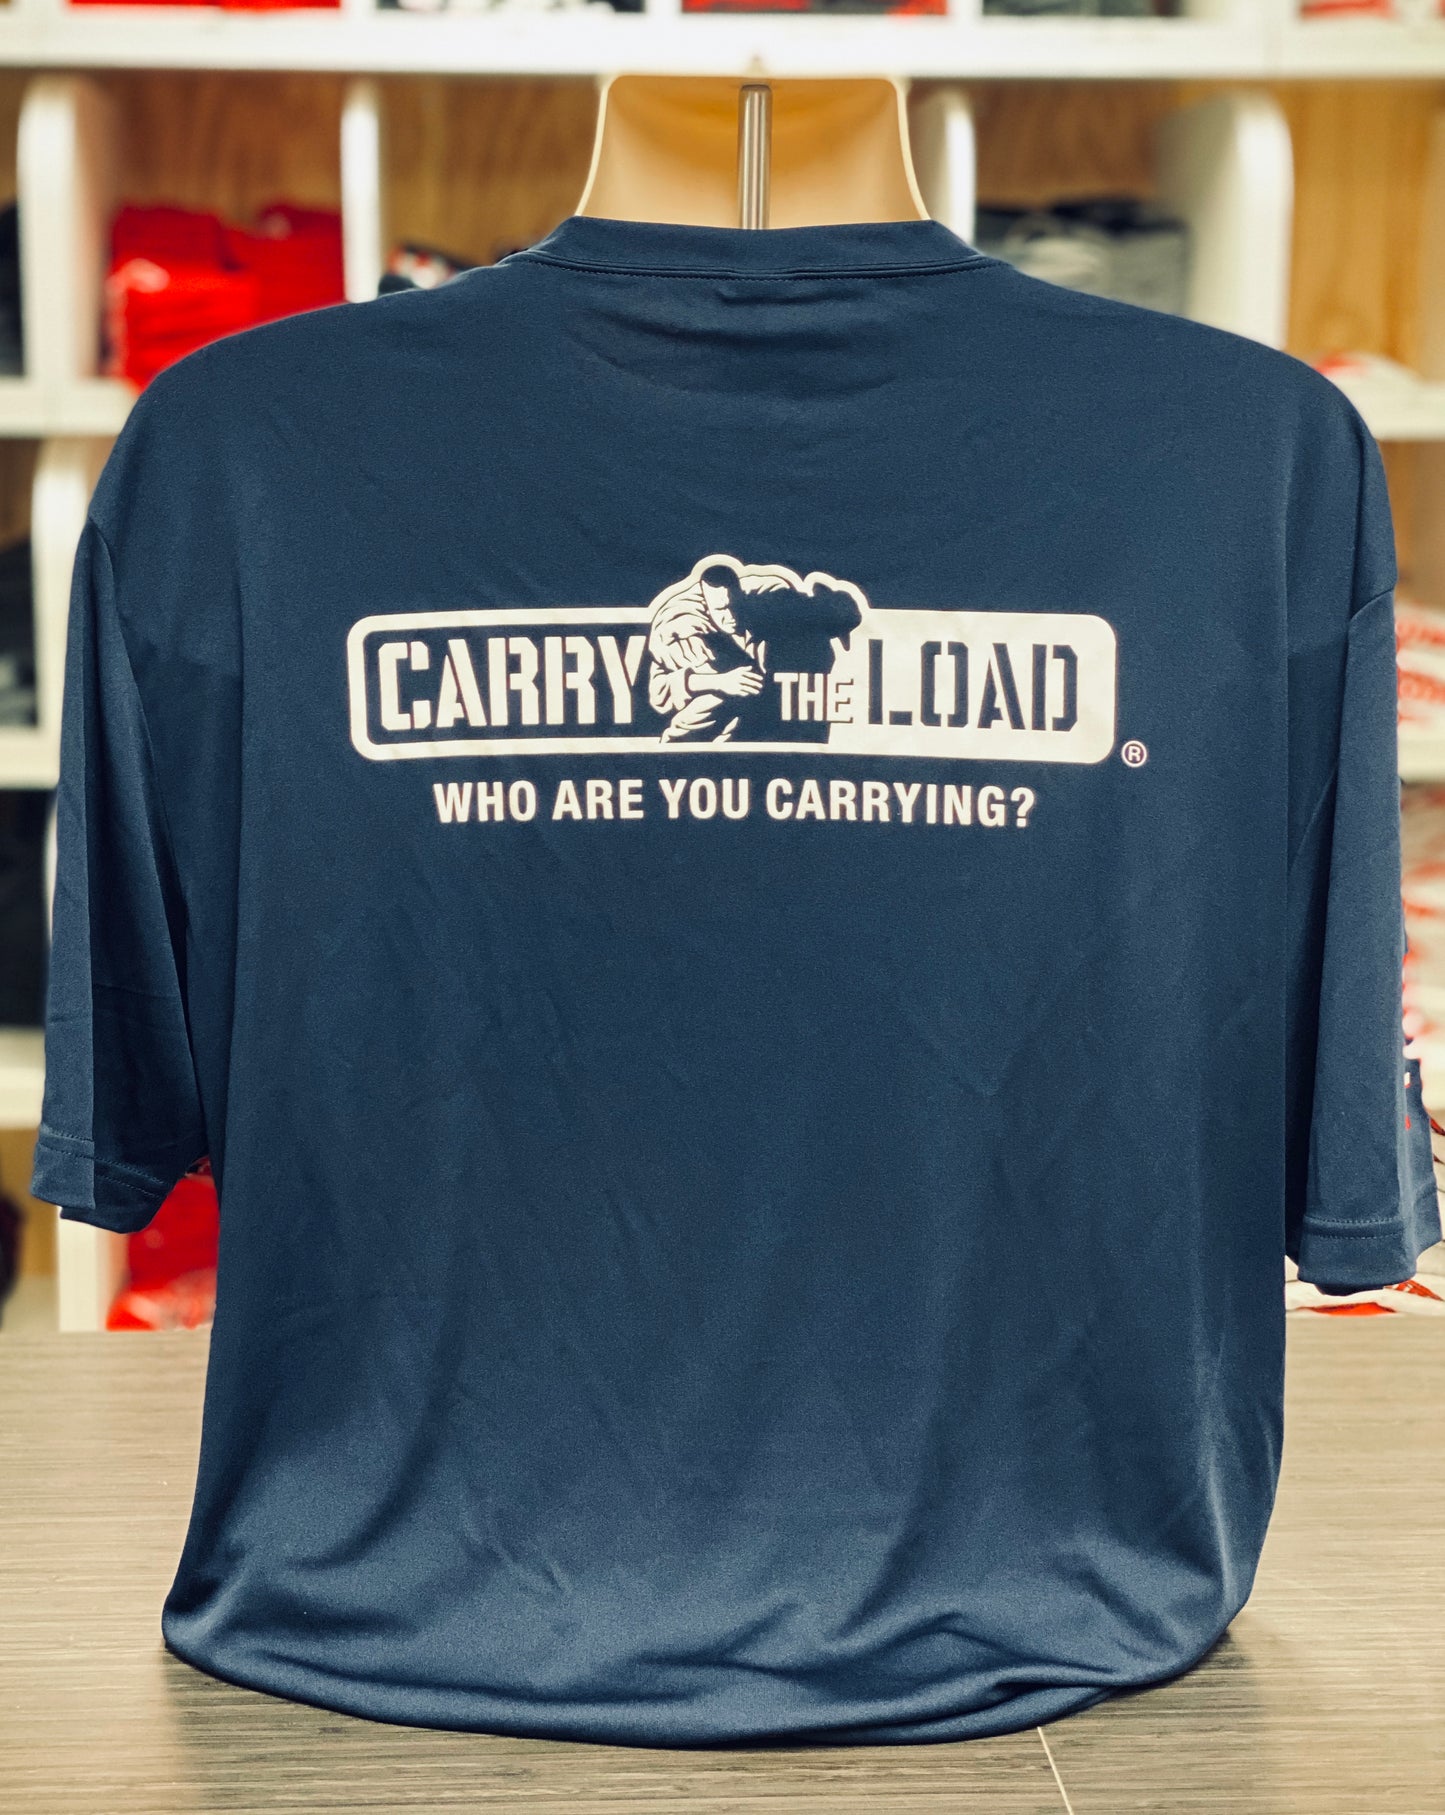 Carry The Load 22KILL t-shirt.